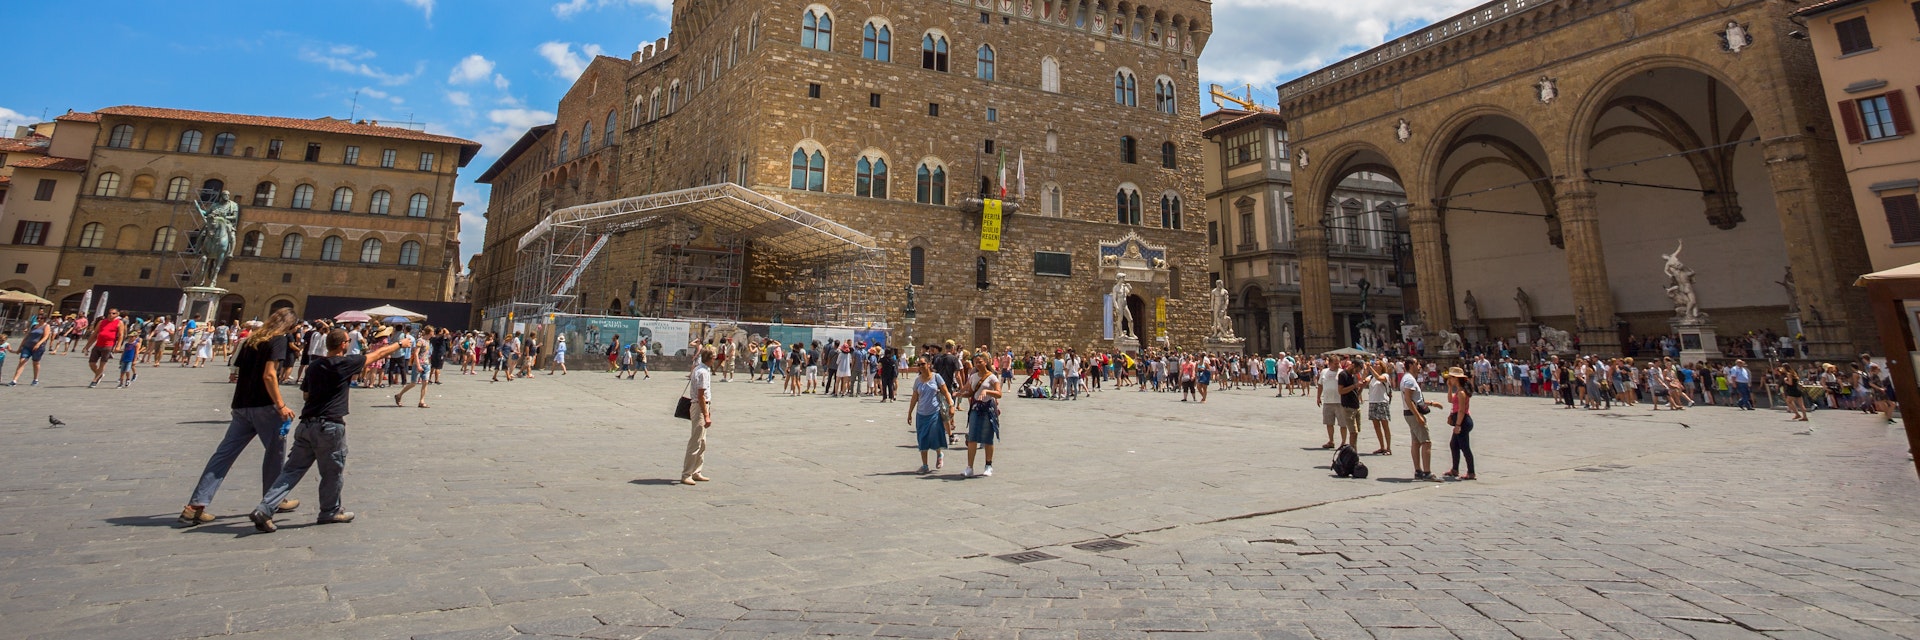 FLORENCE (FIRENZE), JULY 28, 2017 - view of Square of Signoria with Palazzo Vecchio in Florence, Tuscany, Italy; Shutterstock ID 793861060; purchase_order: 65050; job: poi; client: ; other:
793861060